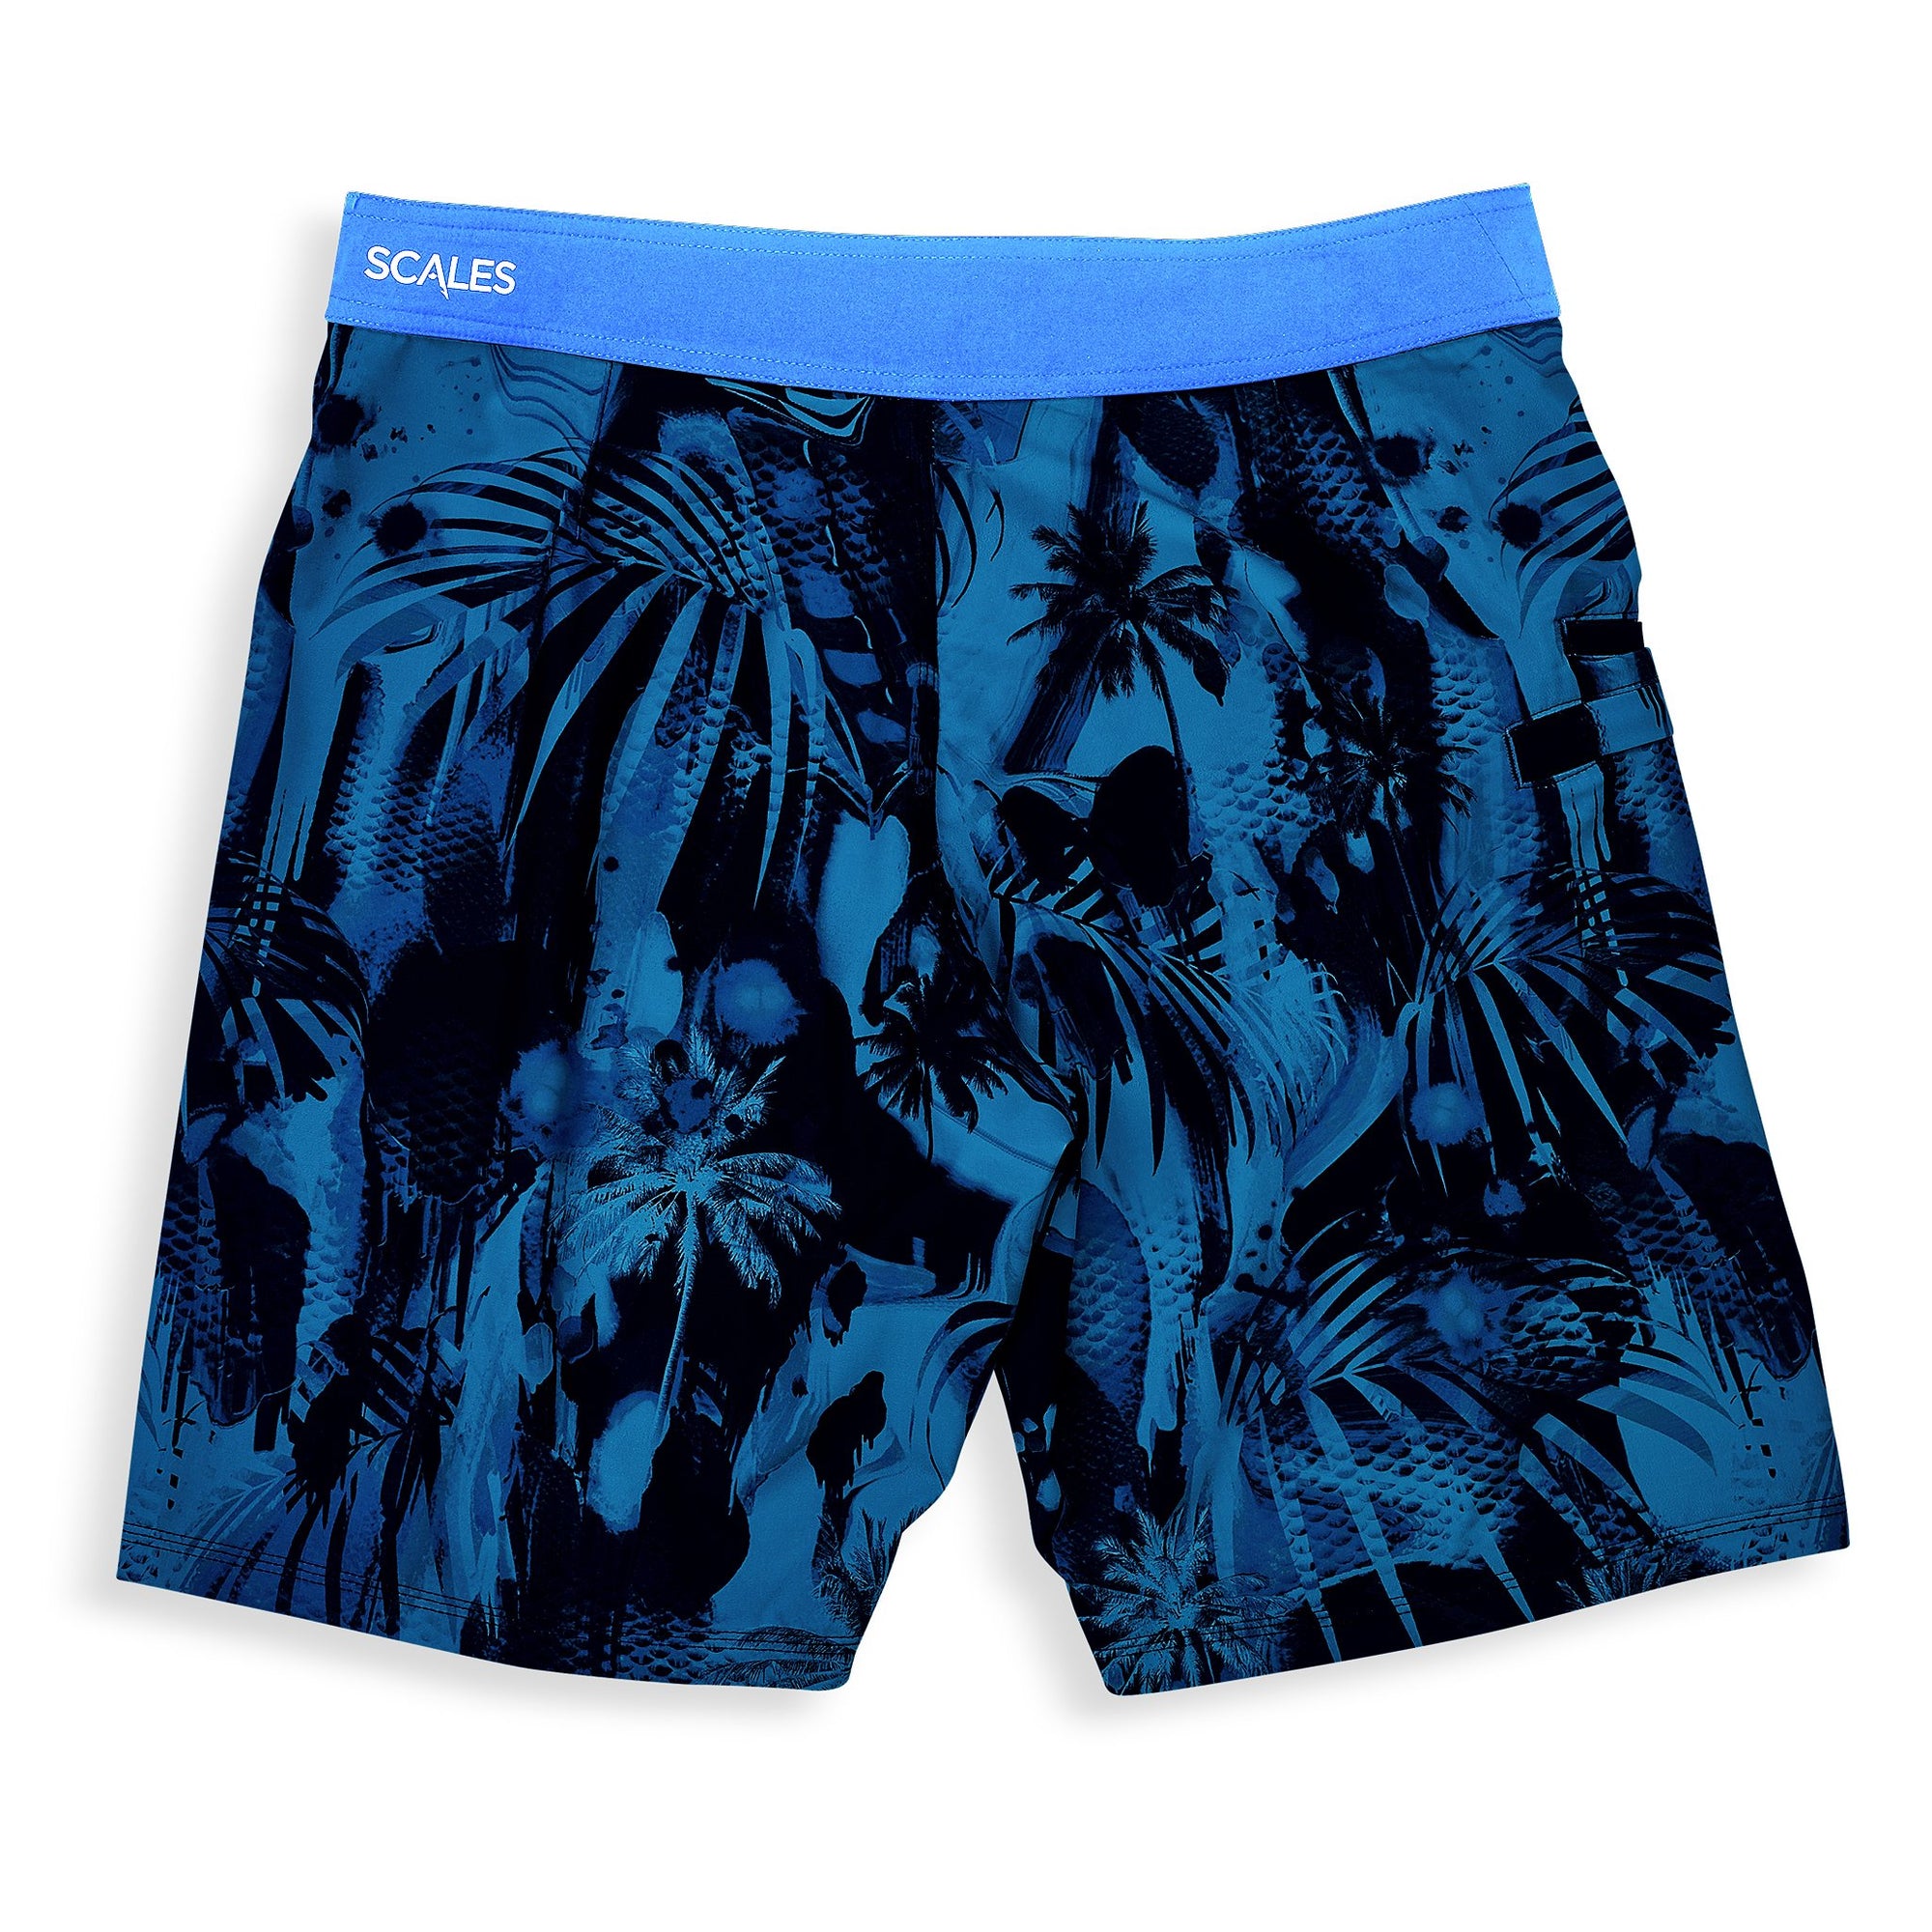 Scales Gear Paradise Drip Boardshorts - Rear View